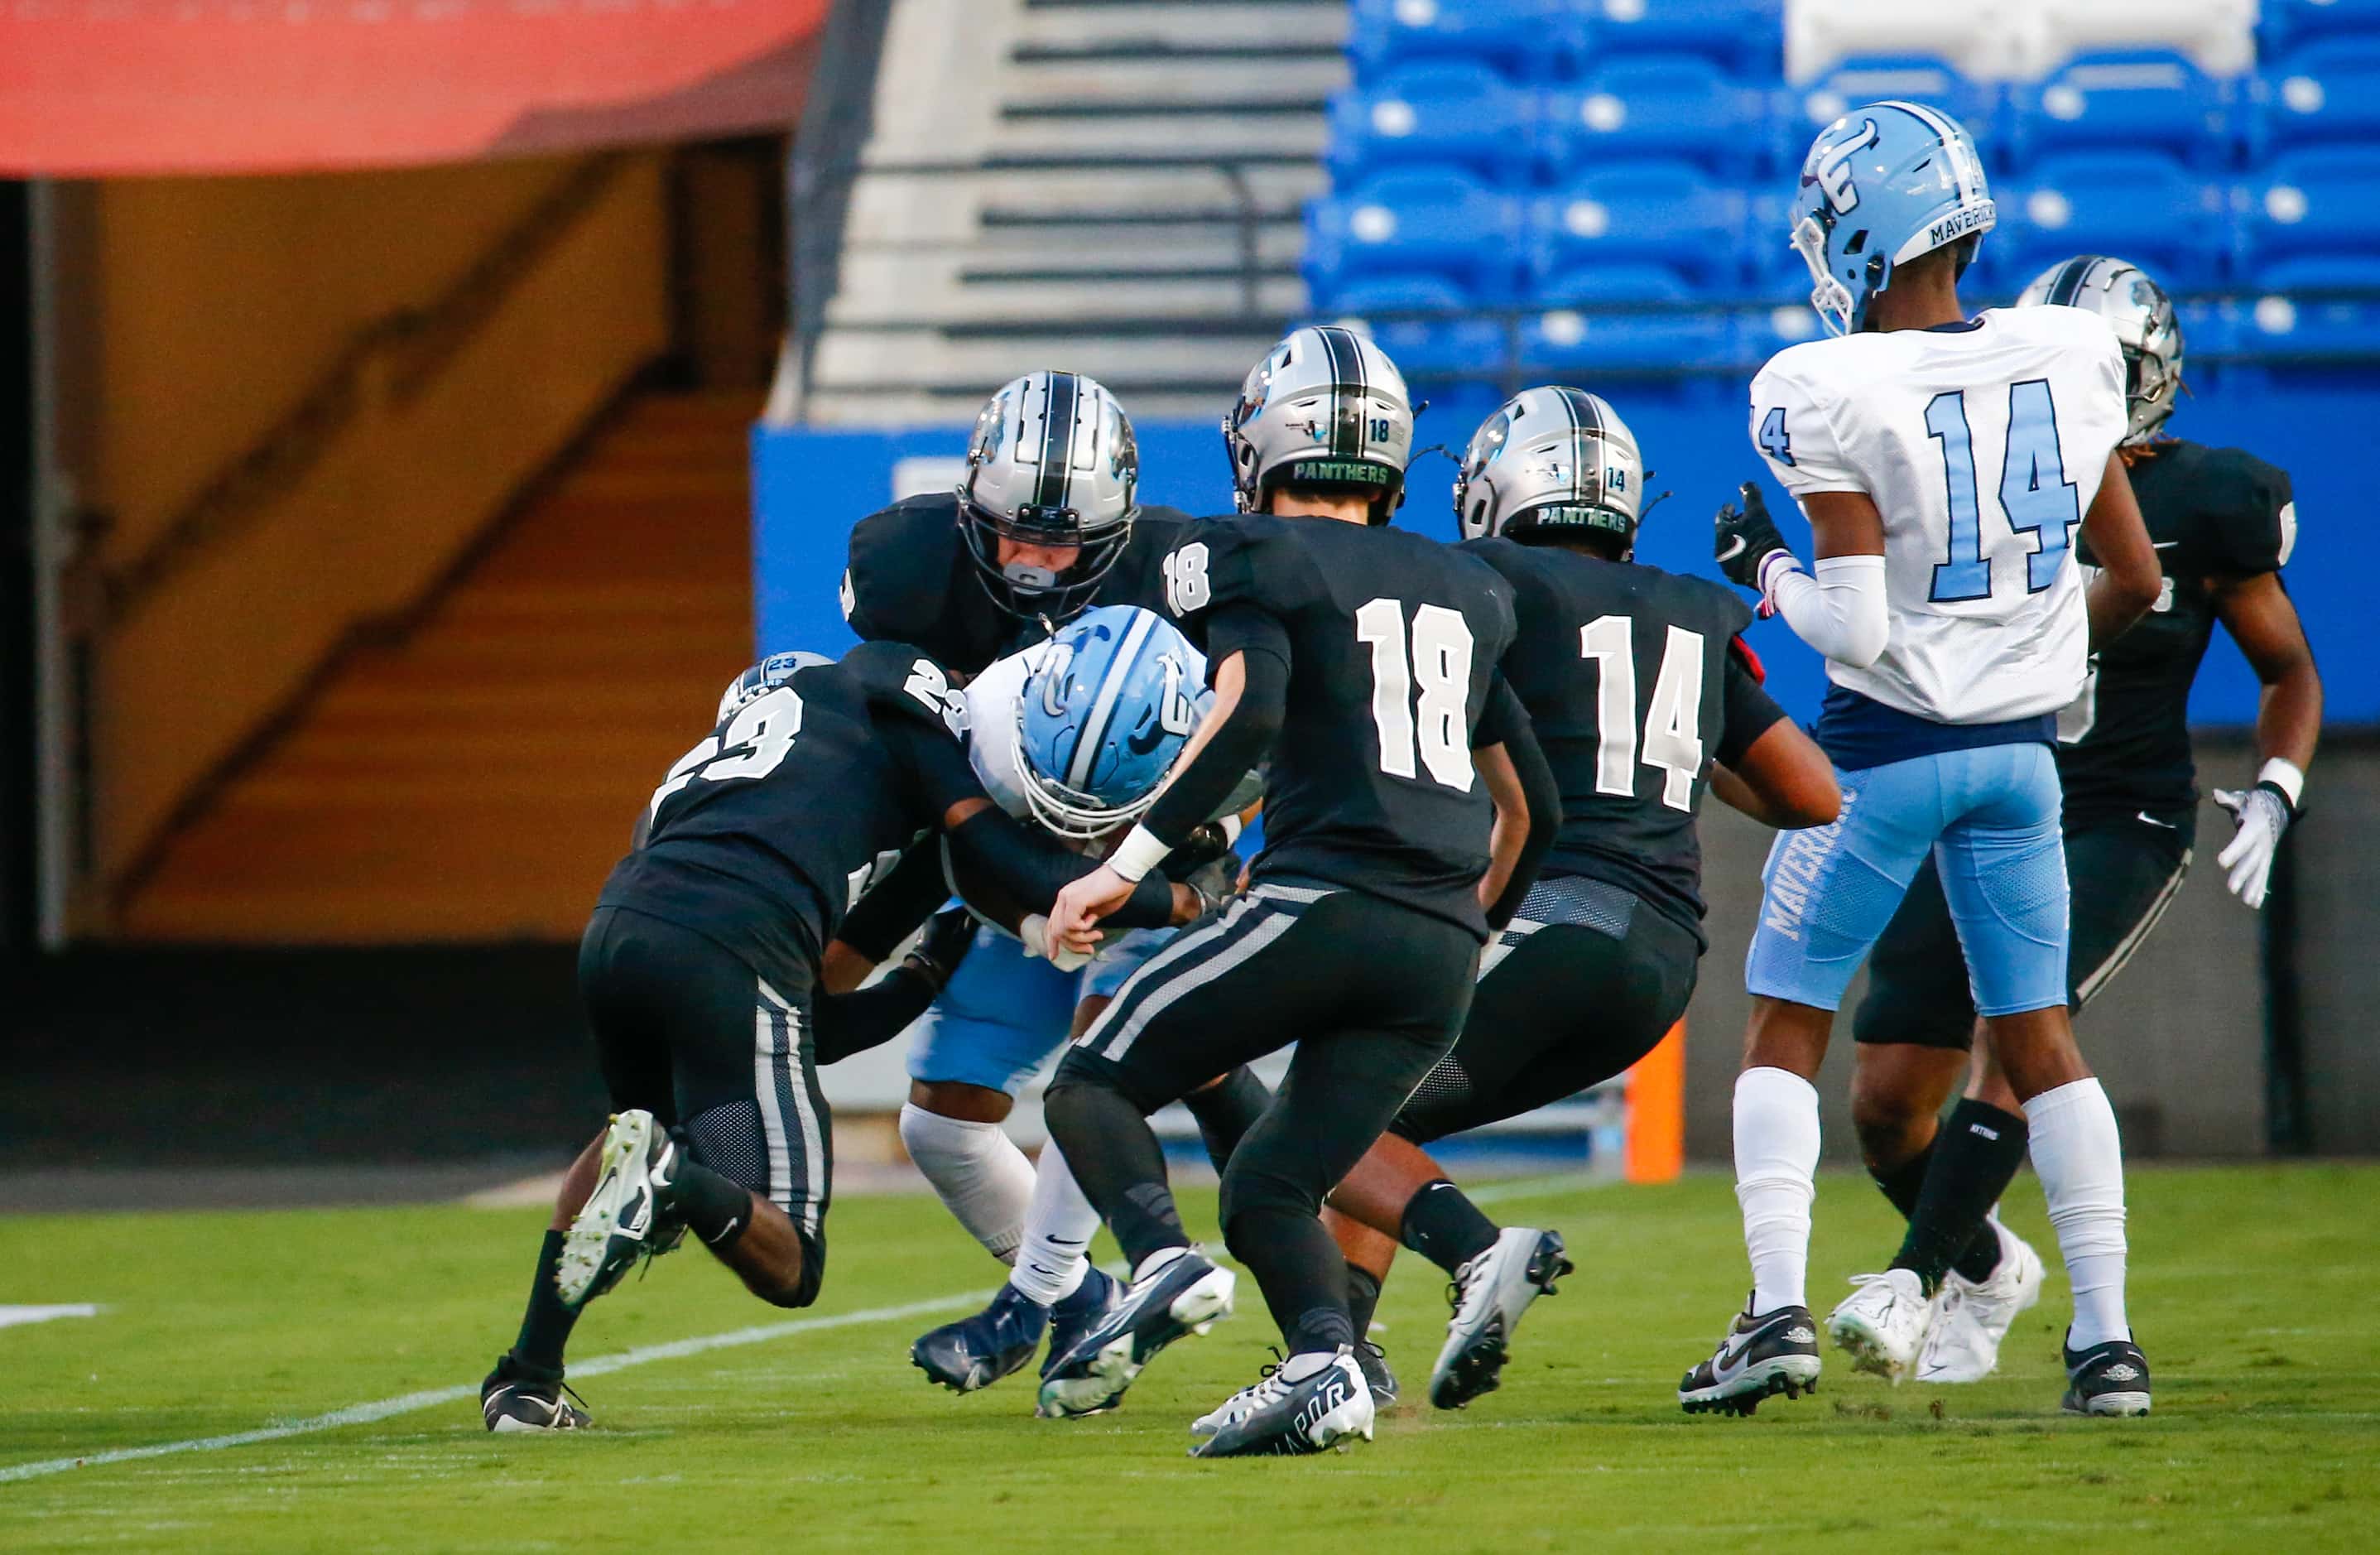 Panther Creek Panthers defense group up to block the Emerson Mavericks from moving the ball...